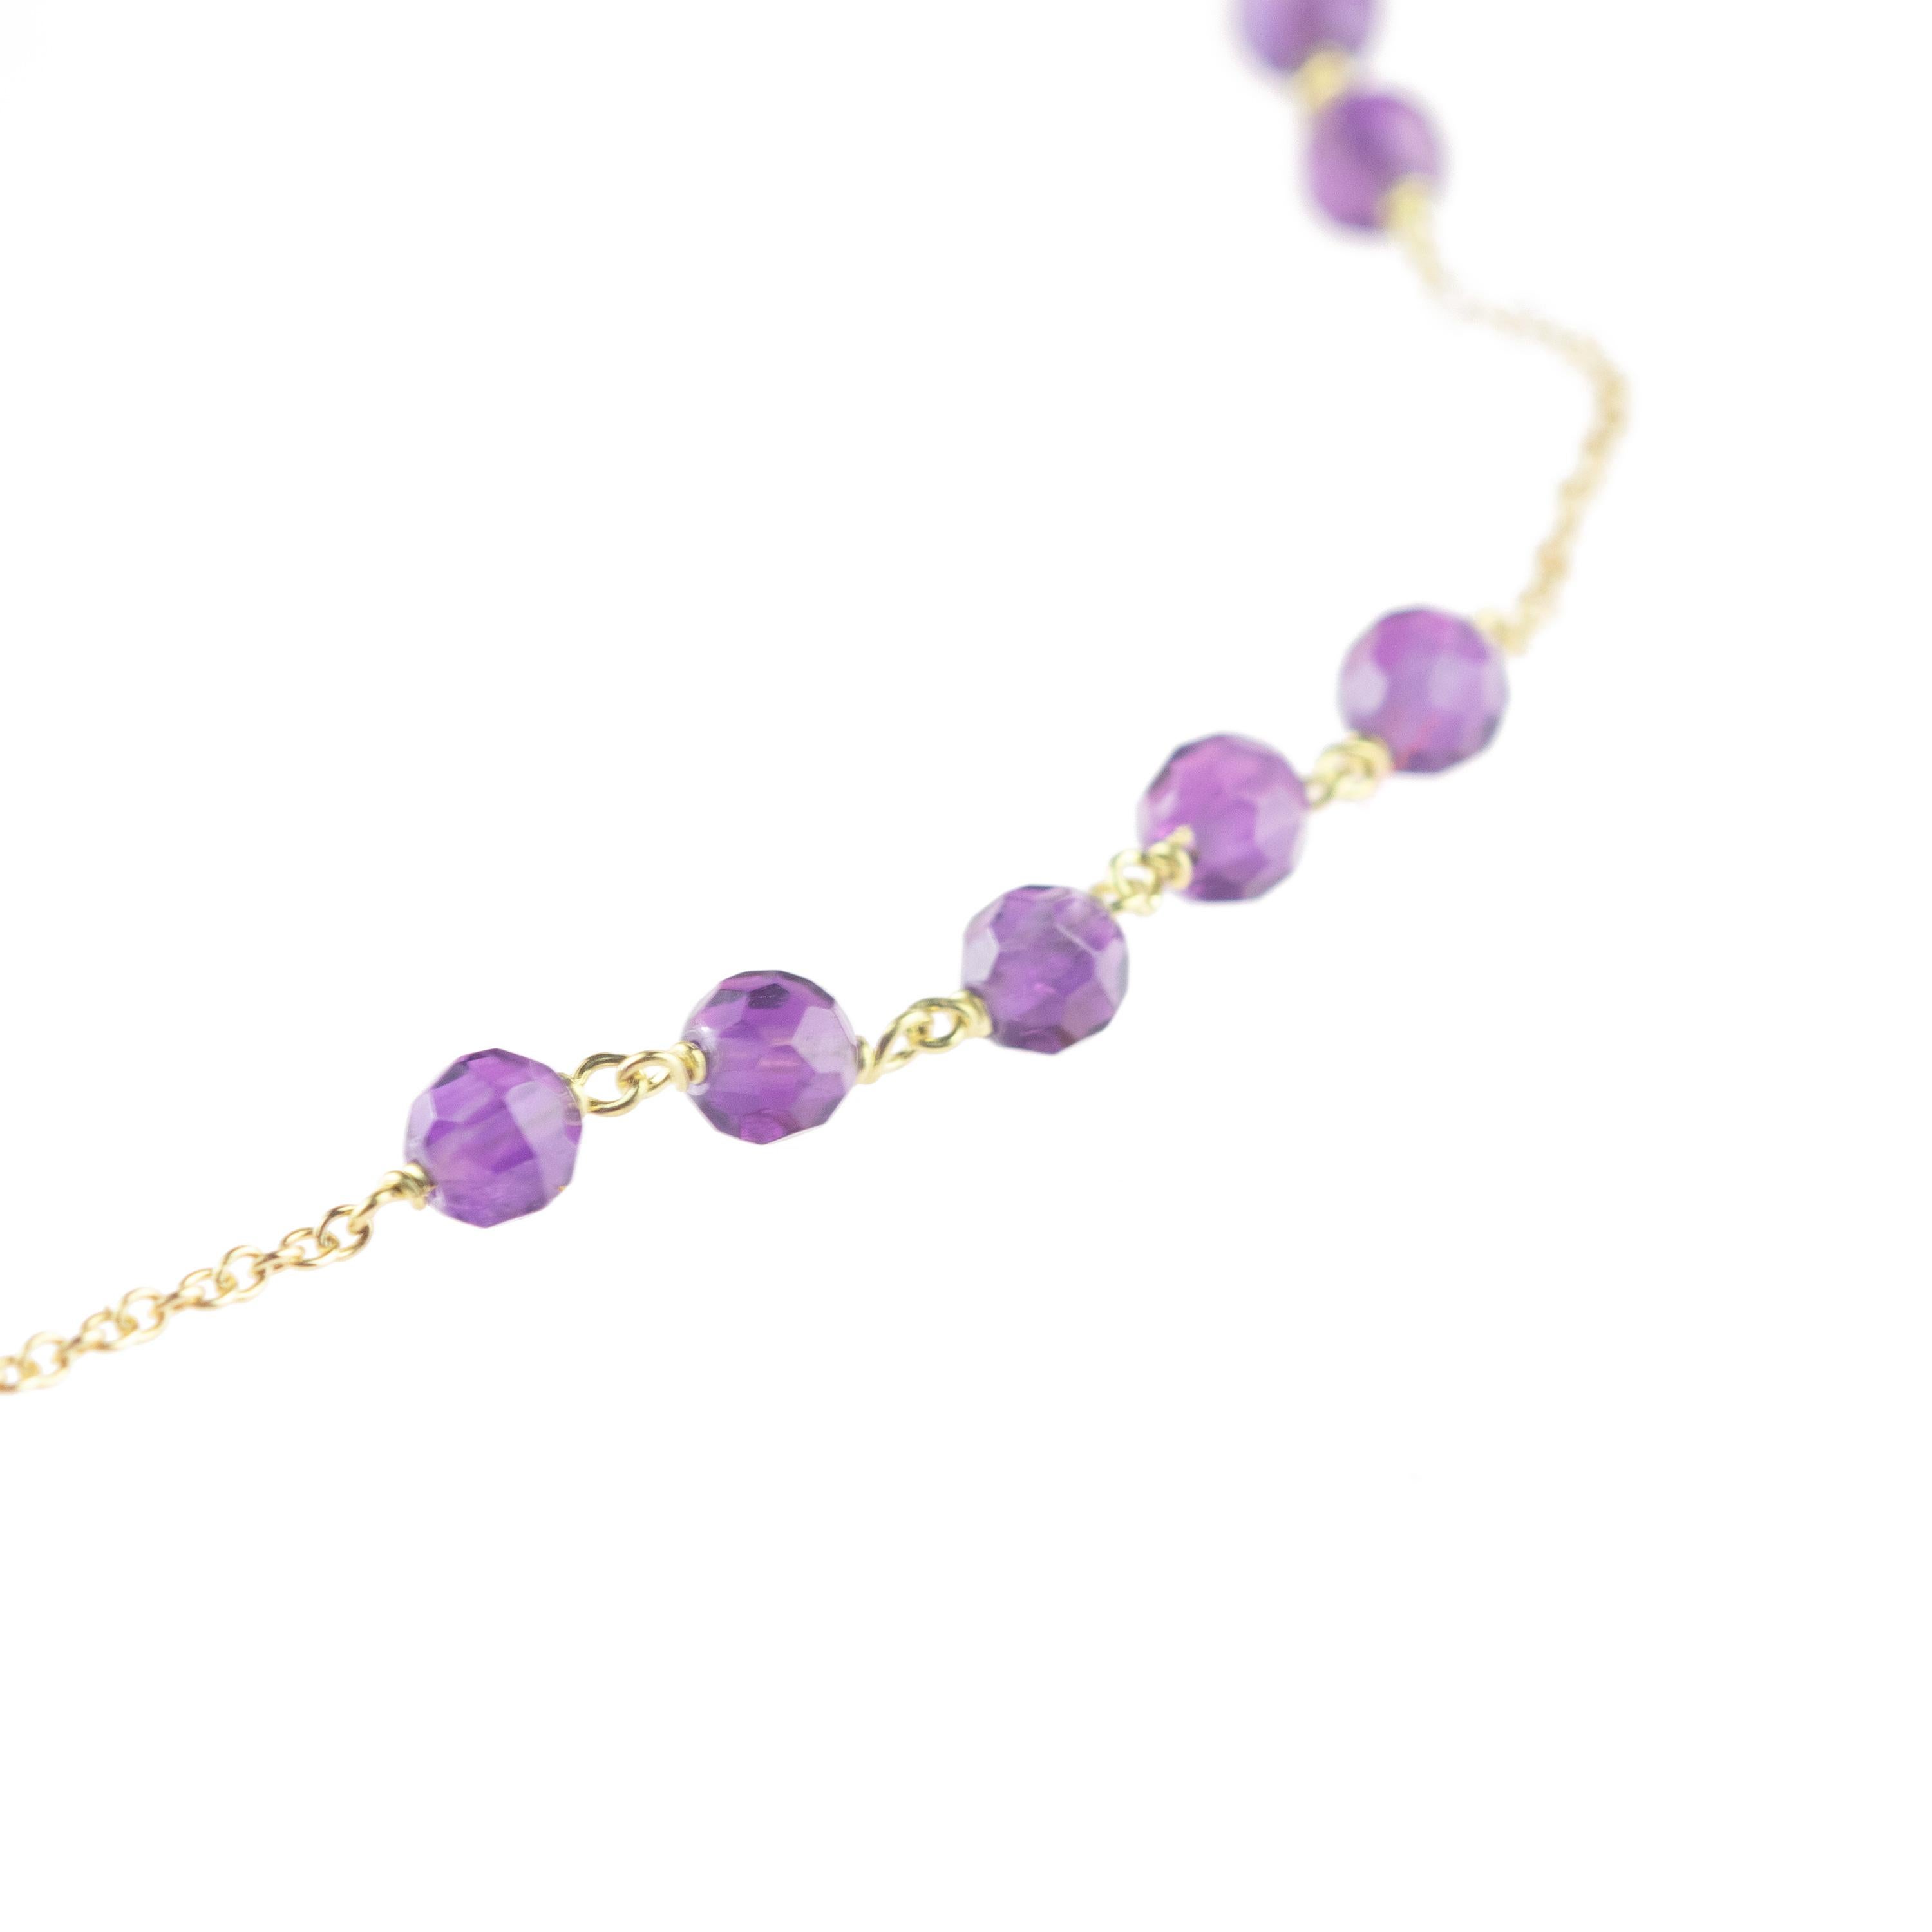 Amethyst Rondelles 9 Karat Yellow Gold Chain Handmade Cocktail Chic Necklace For Sale 1